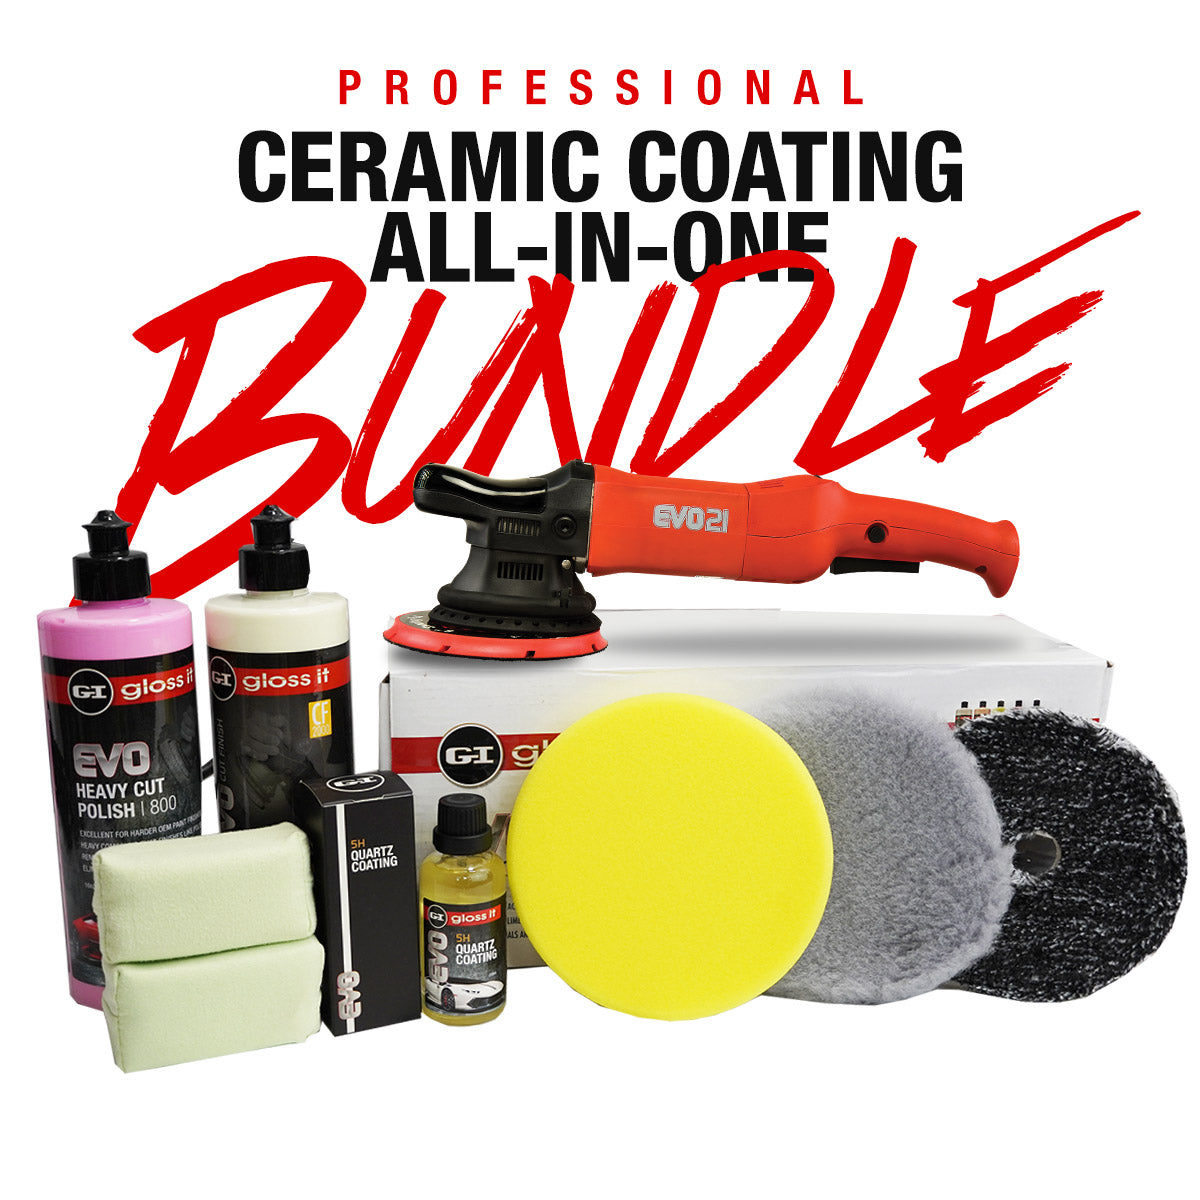 Professional Ceramic Coating All-In-One Bundle